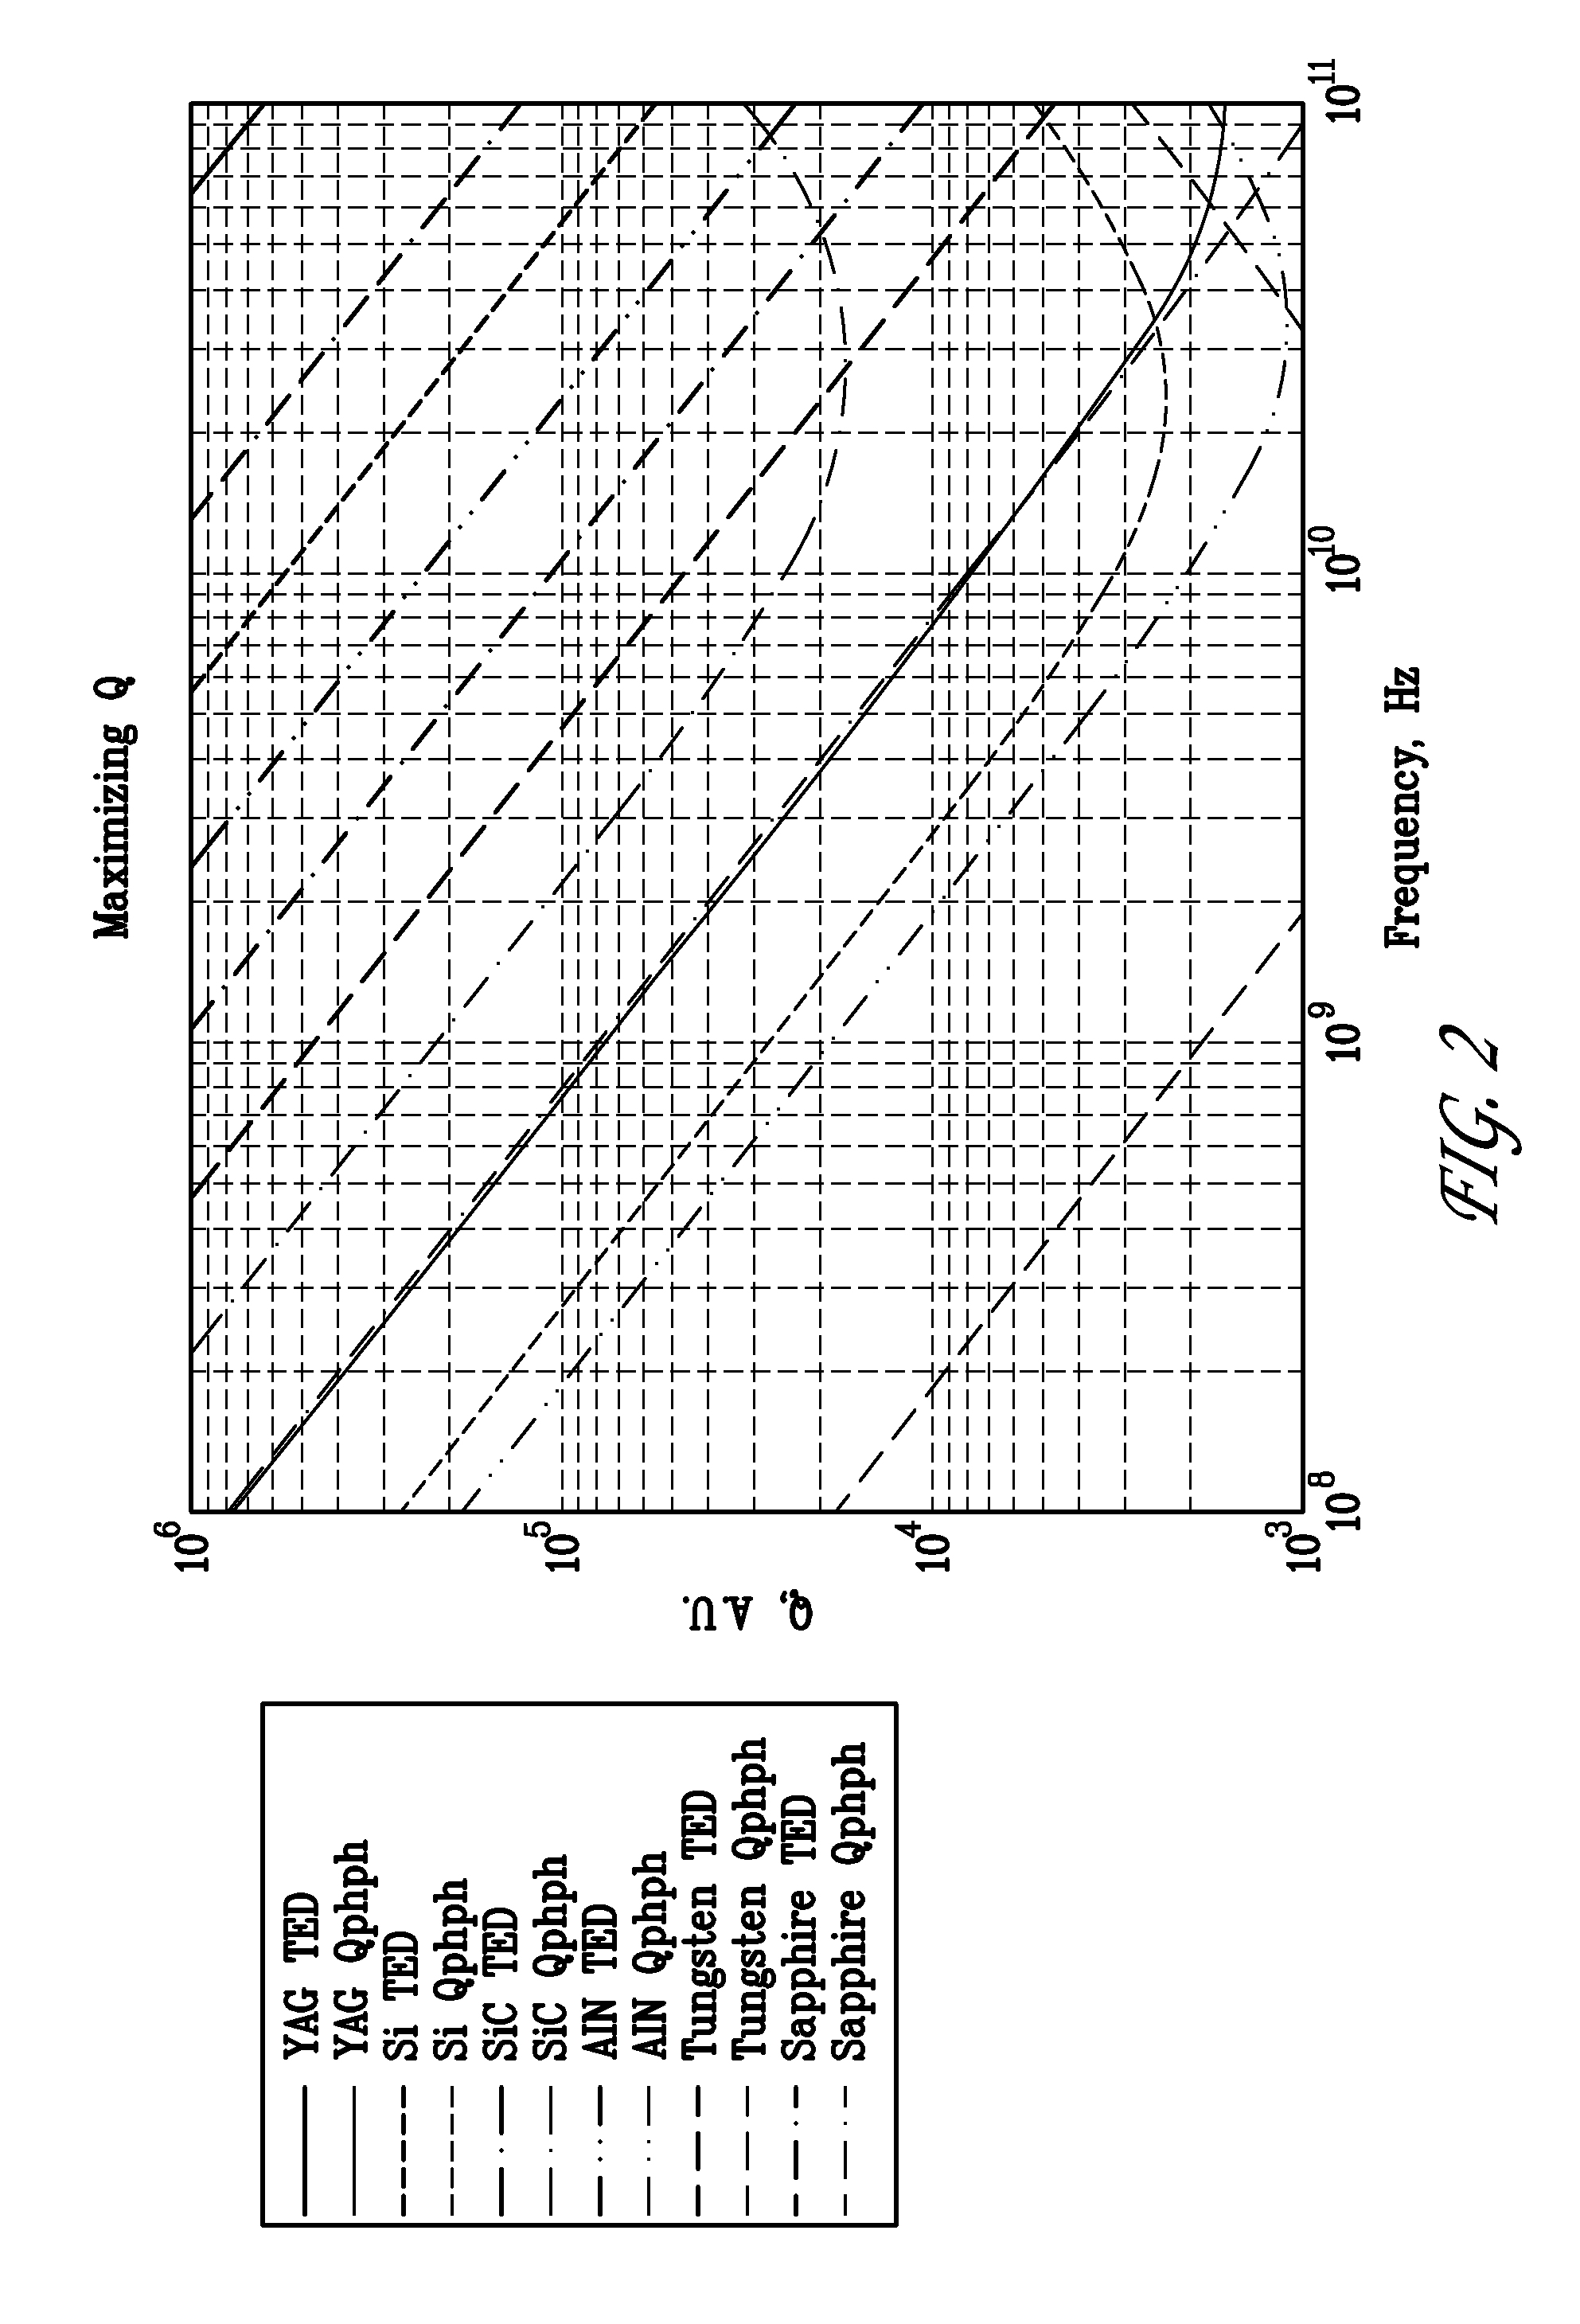 Lateral acoustic wave resonator comprising a suspended membrane of low damping resonator material